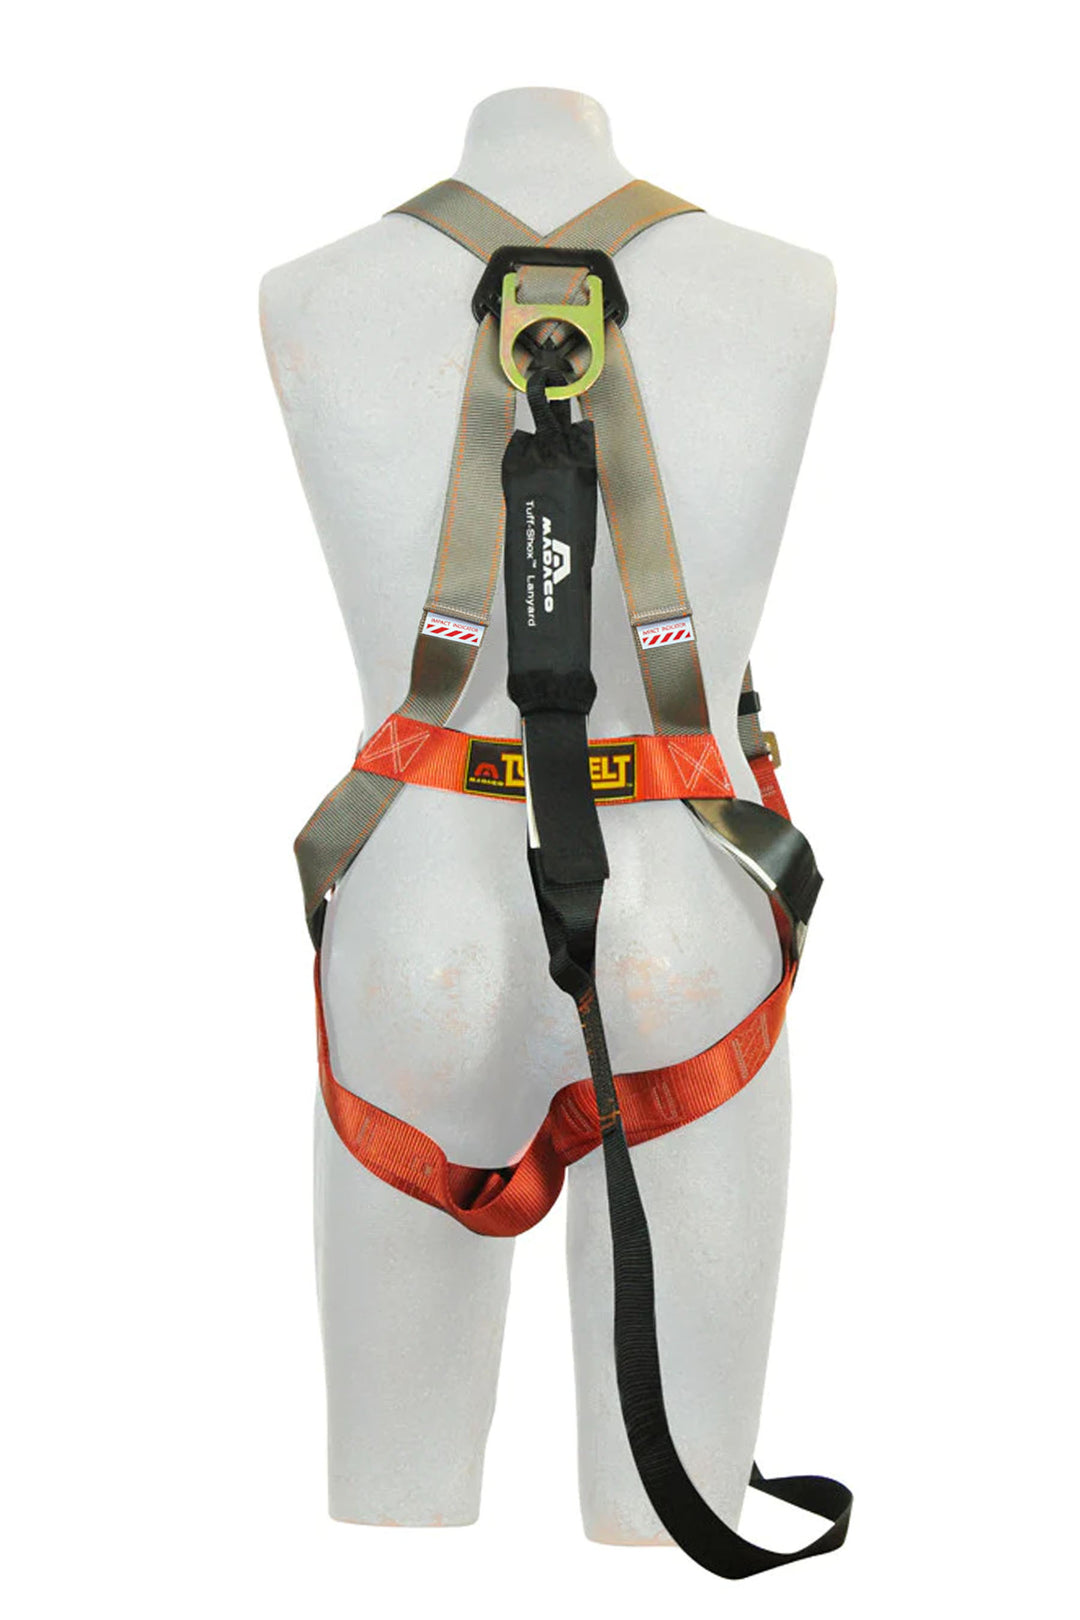 Standard Full Body Safety Harness with Shock Absorption Lanyard